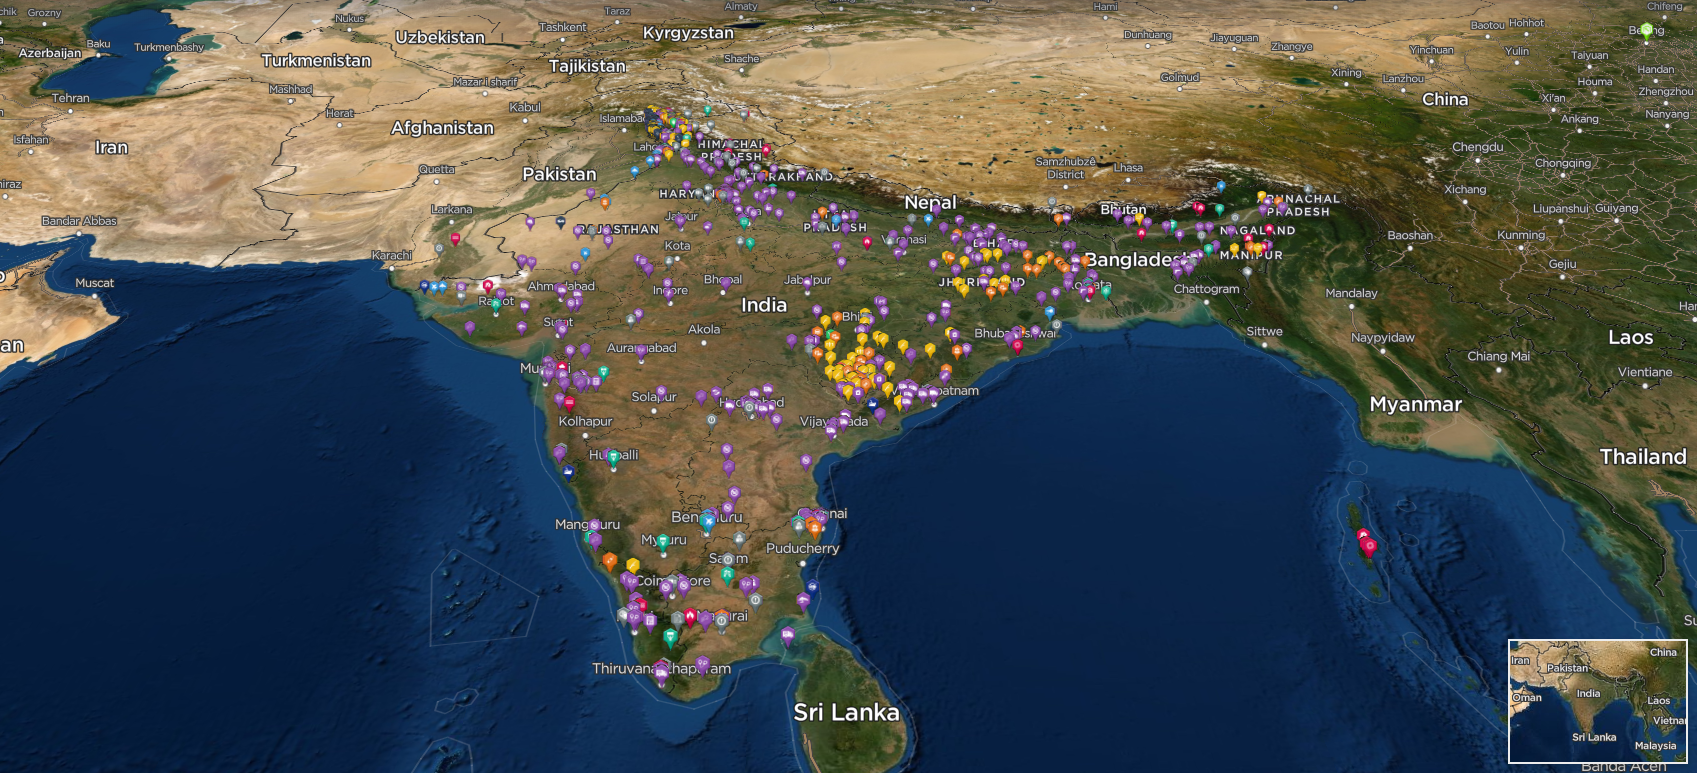 A snapshot of incidents across India between January and October 2019